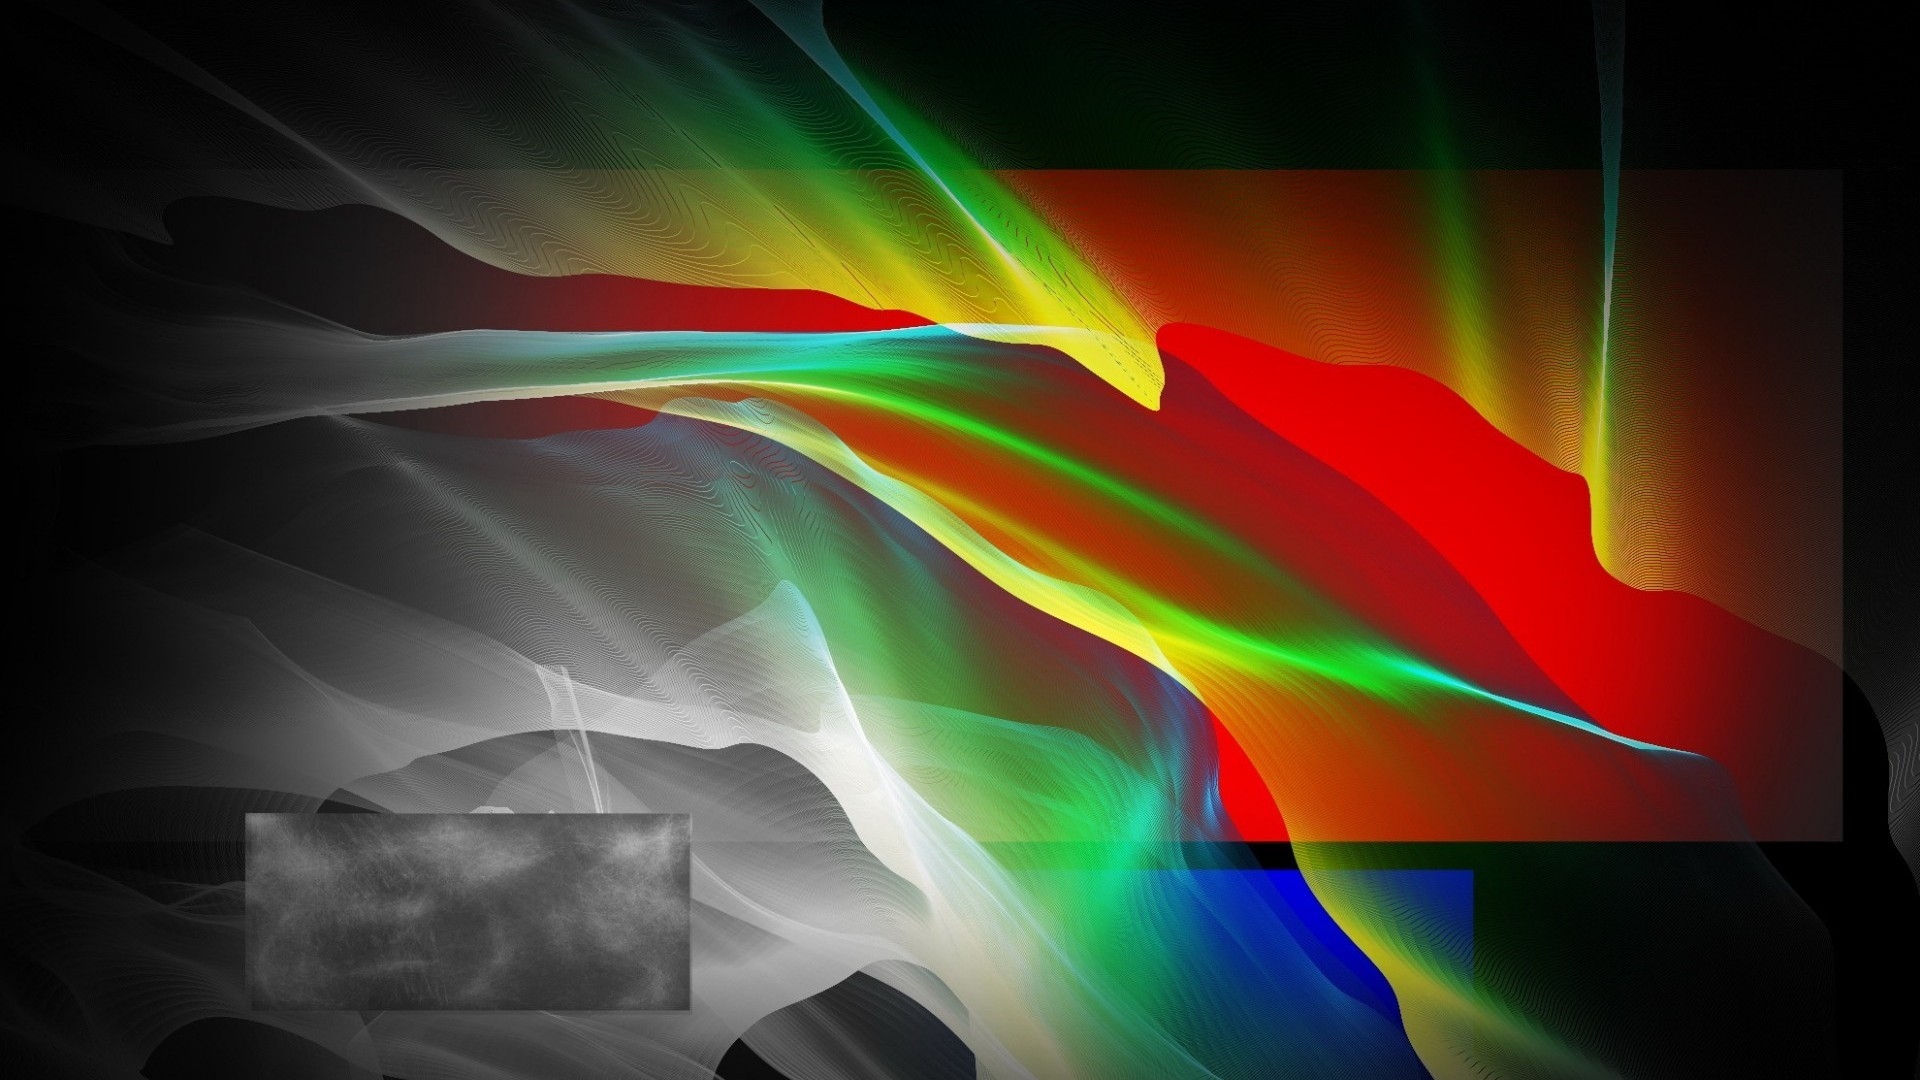 Abstract Shapes for 1920 x 1080 HDTV 1080p resolution